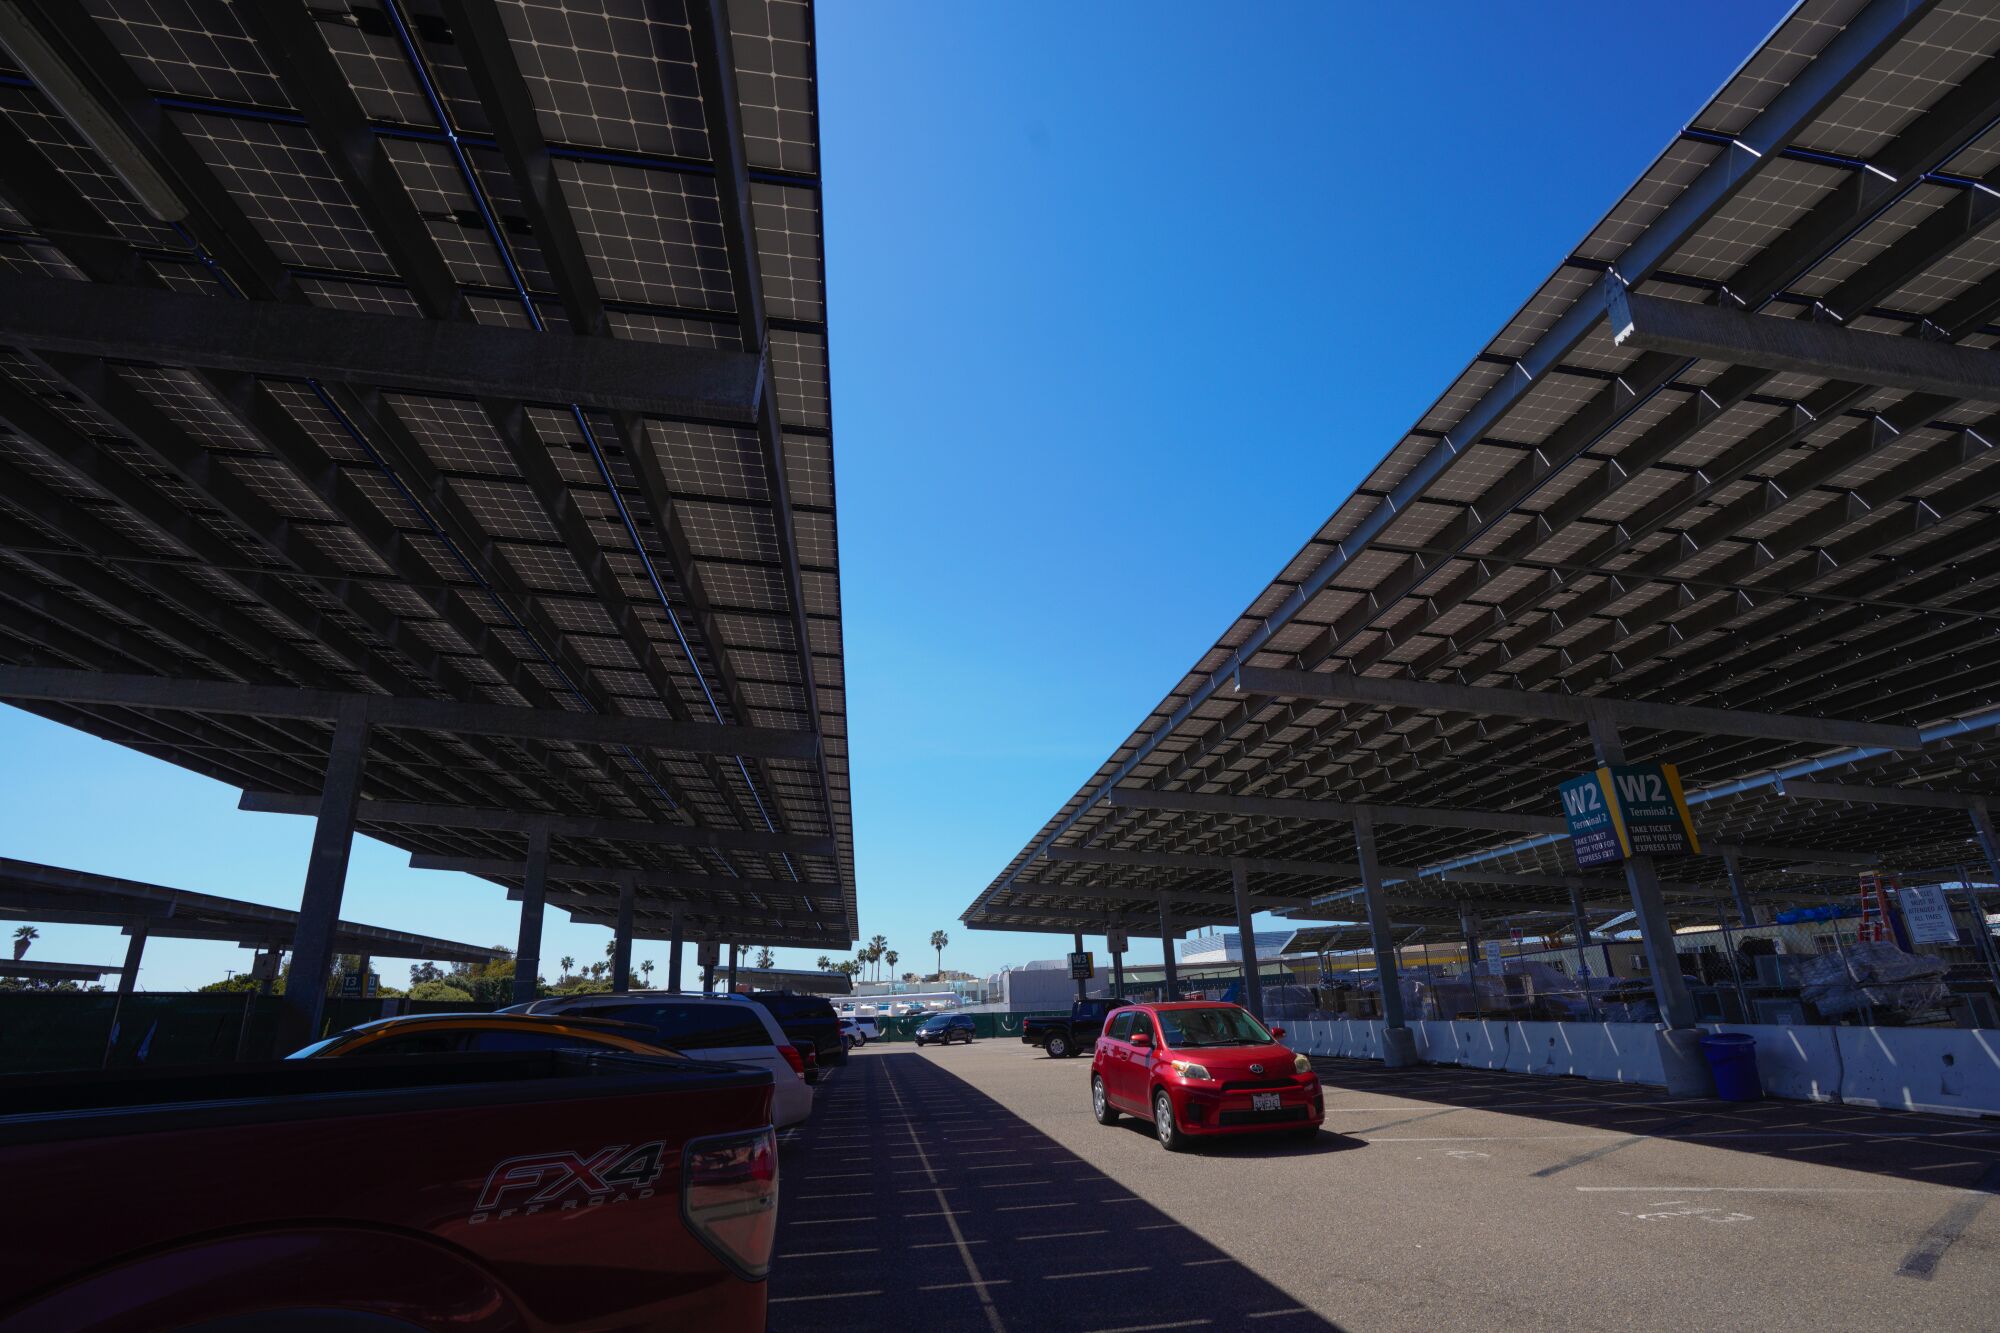 A solar canopy at San Diego International Airport’s cellphone parking lot on April 7, 2023.